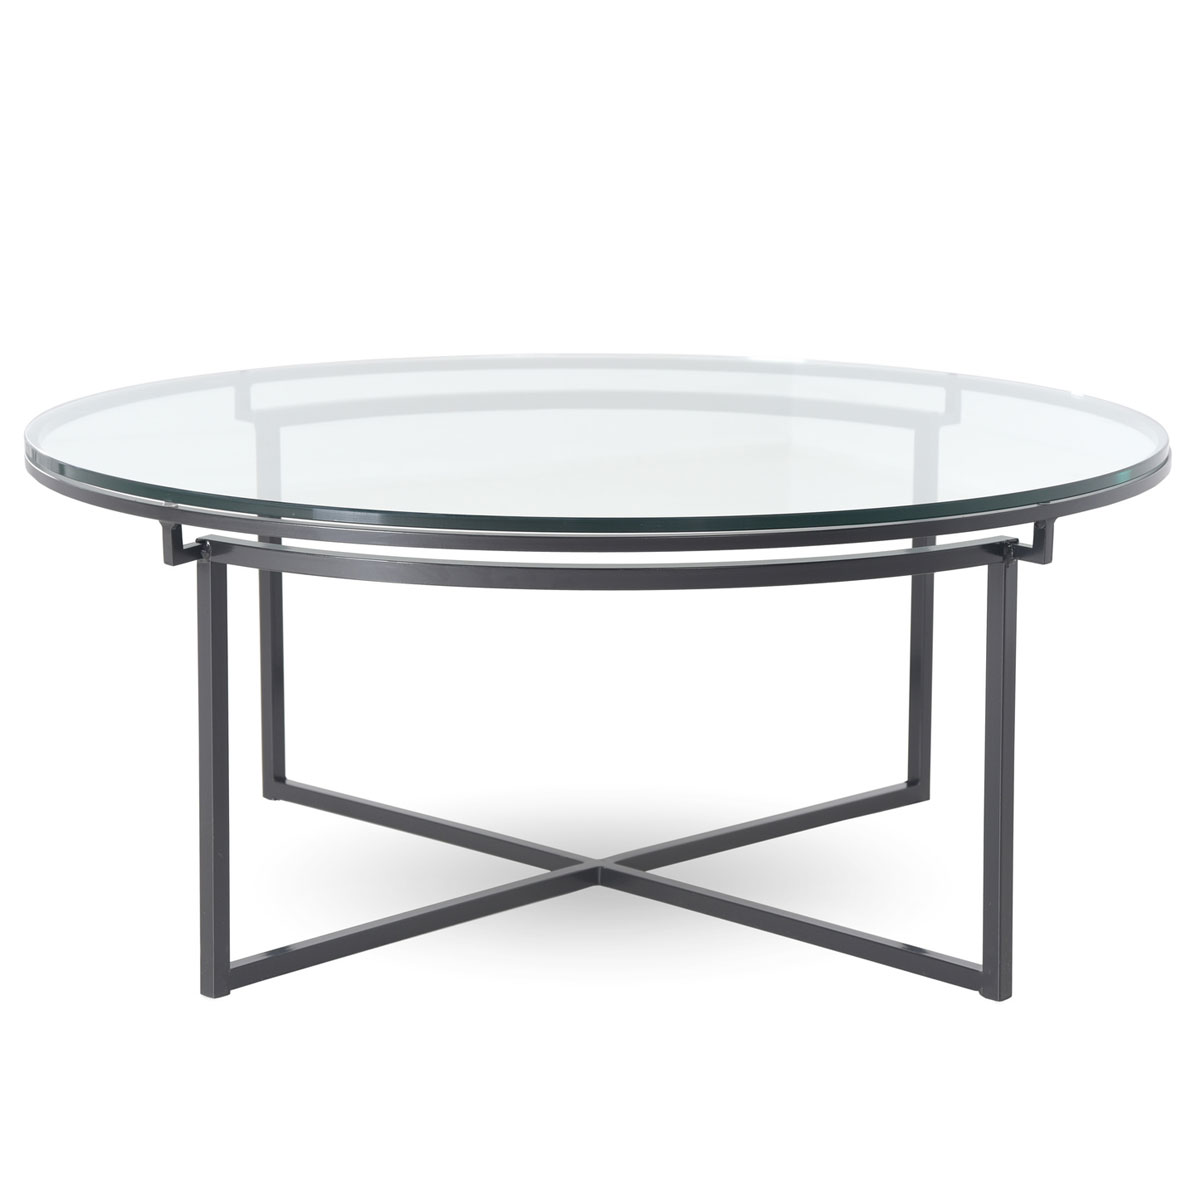 Charleston Forge Fillmore 42 inch Round Cocktail Table